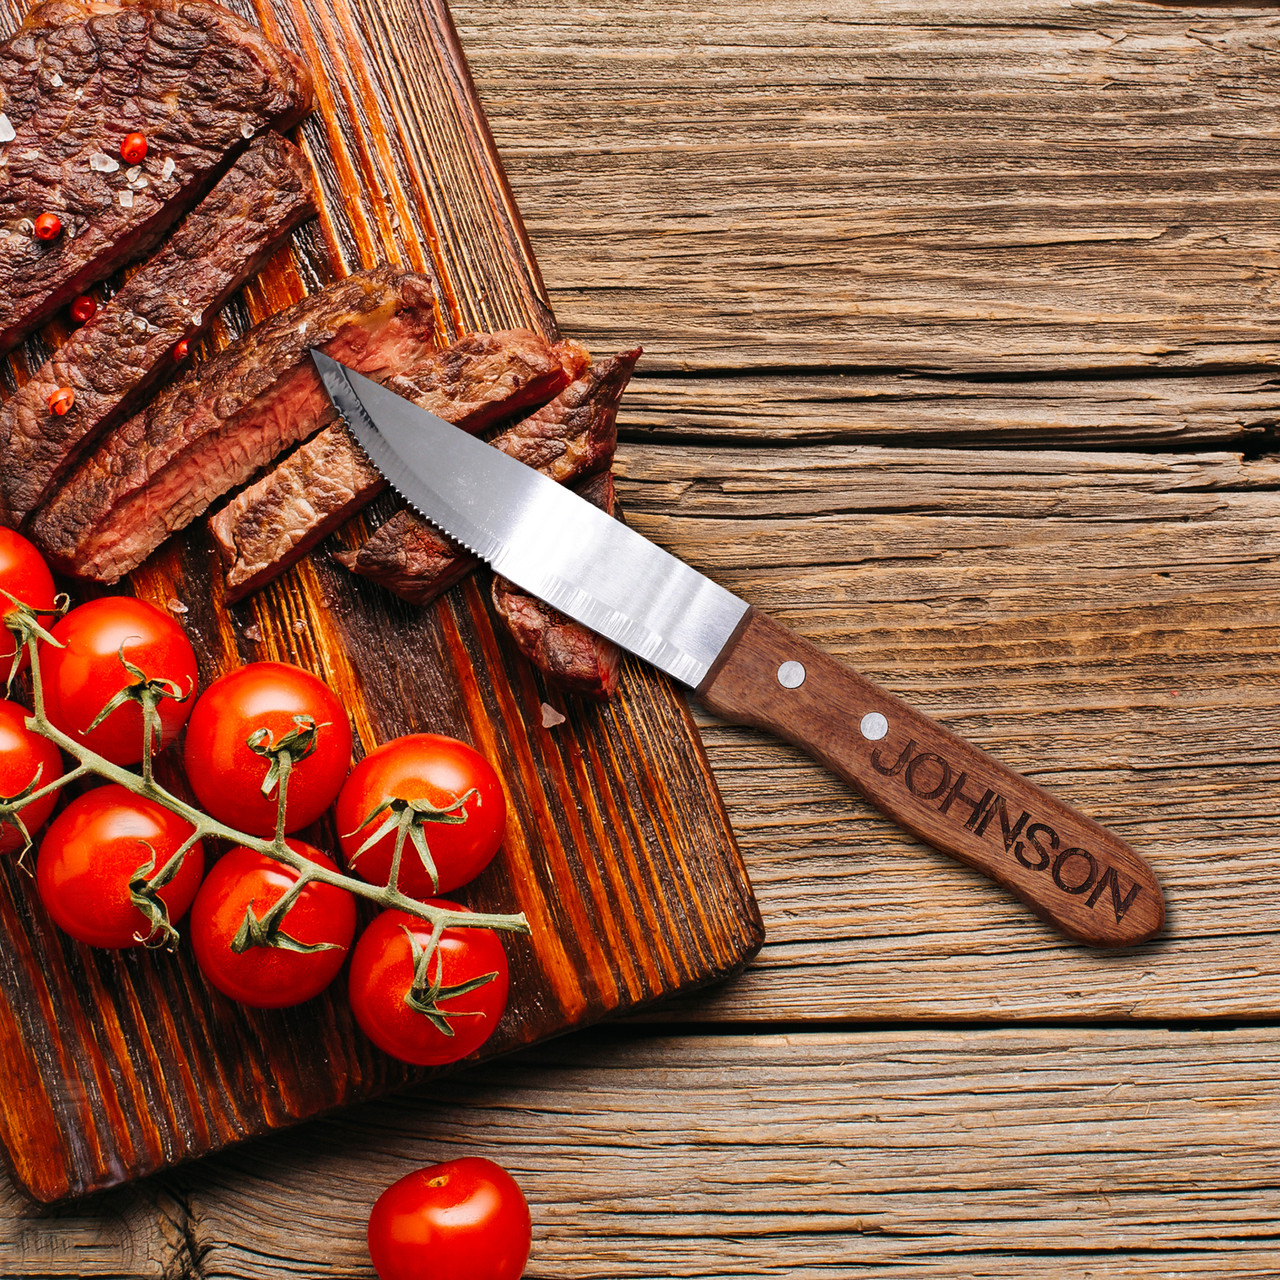 Personalized Steak knife A perfect gift for the steak lover that